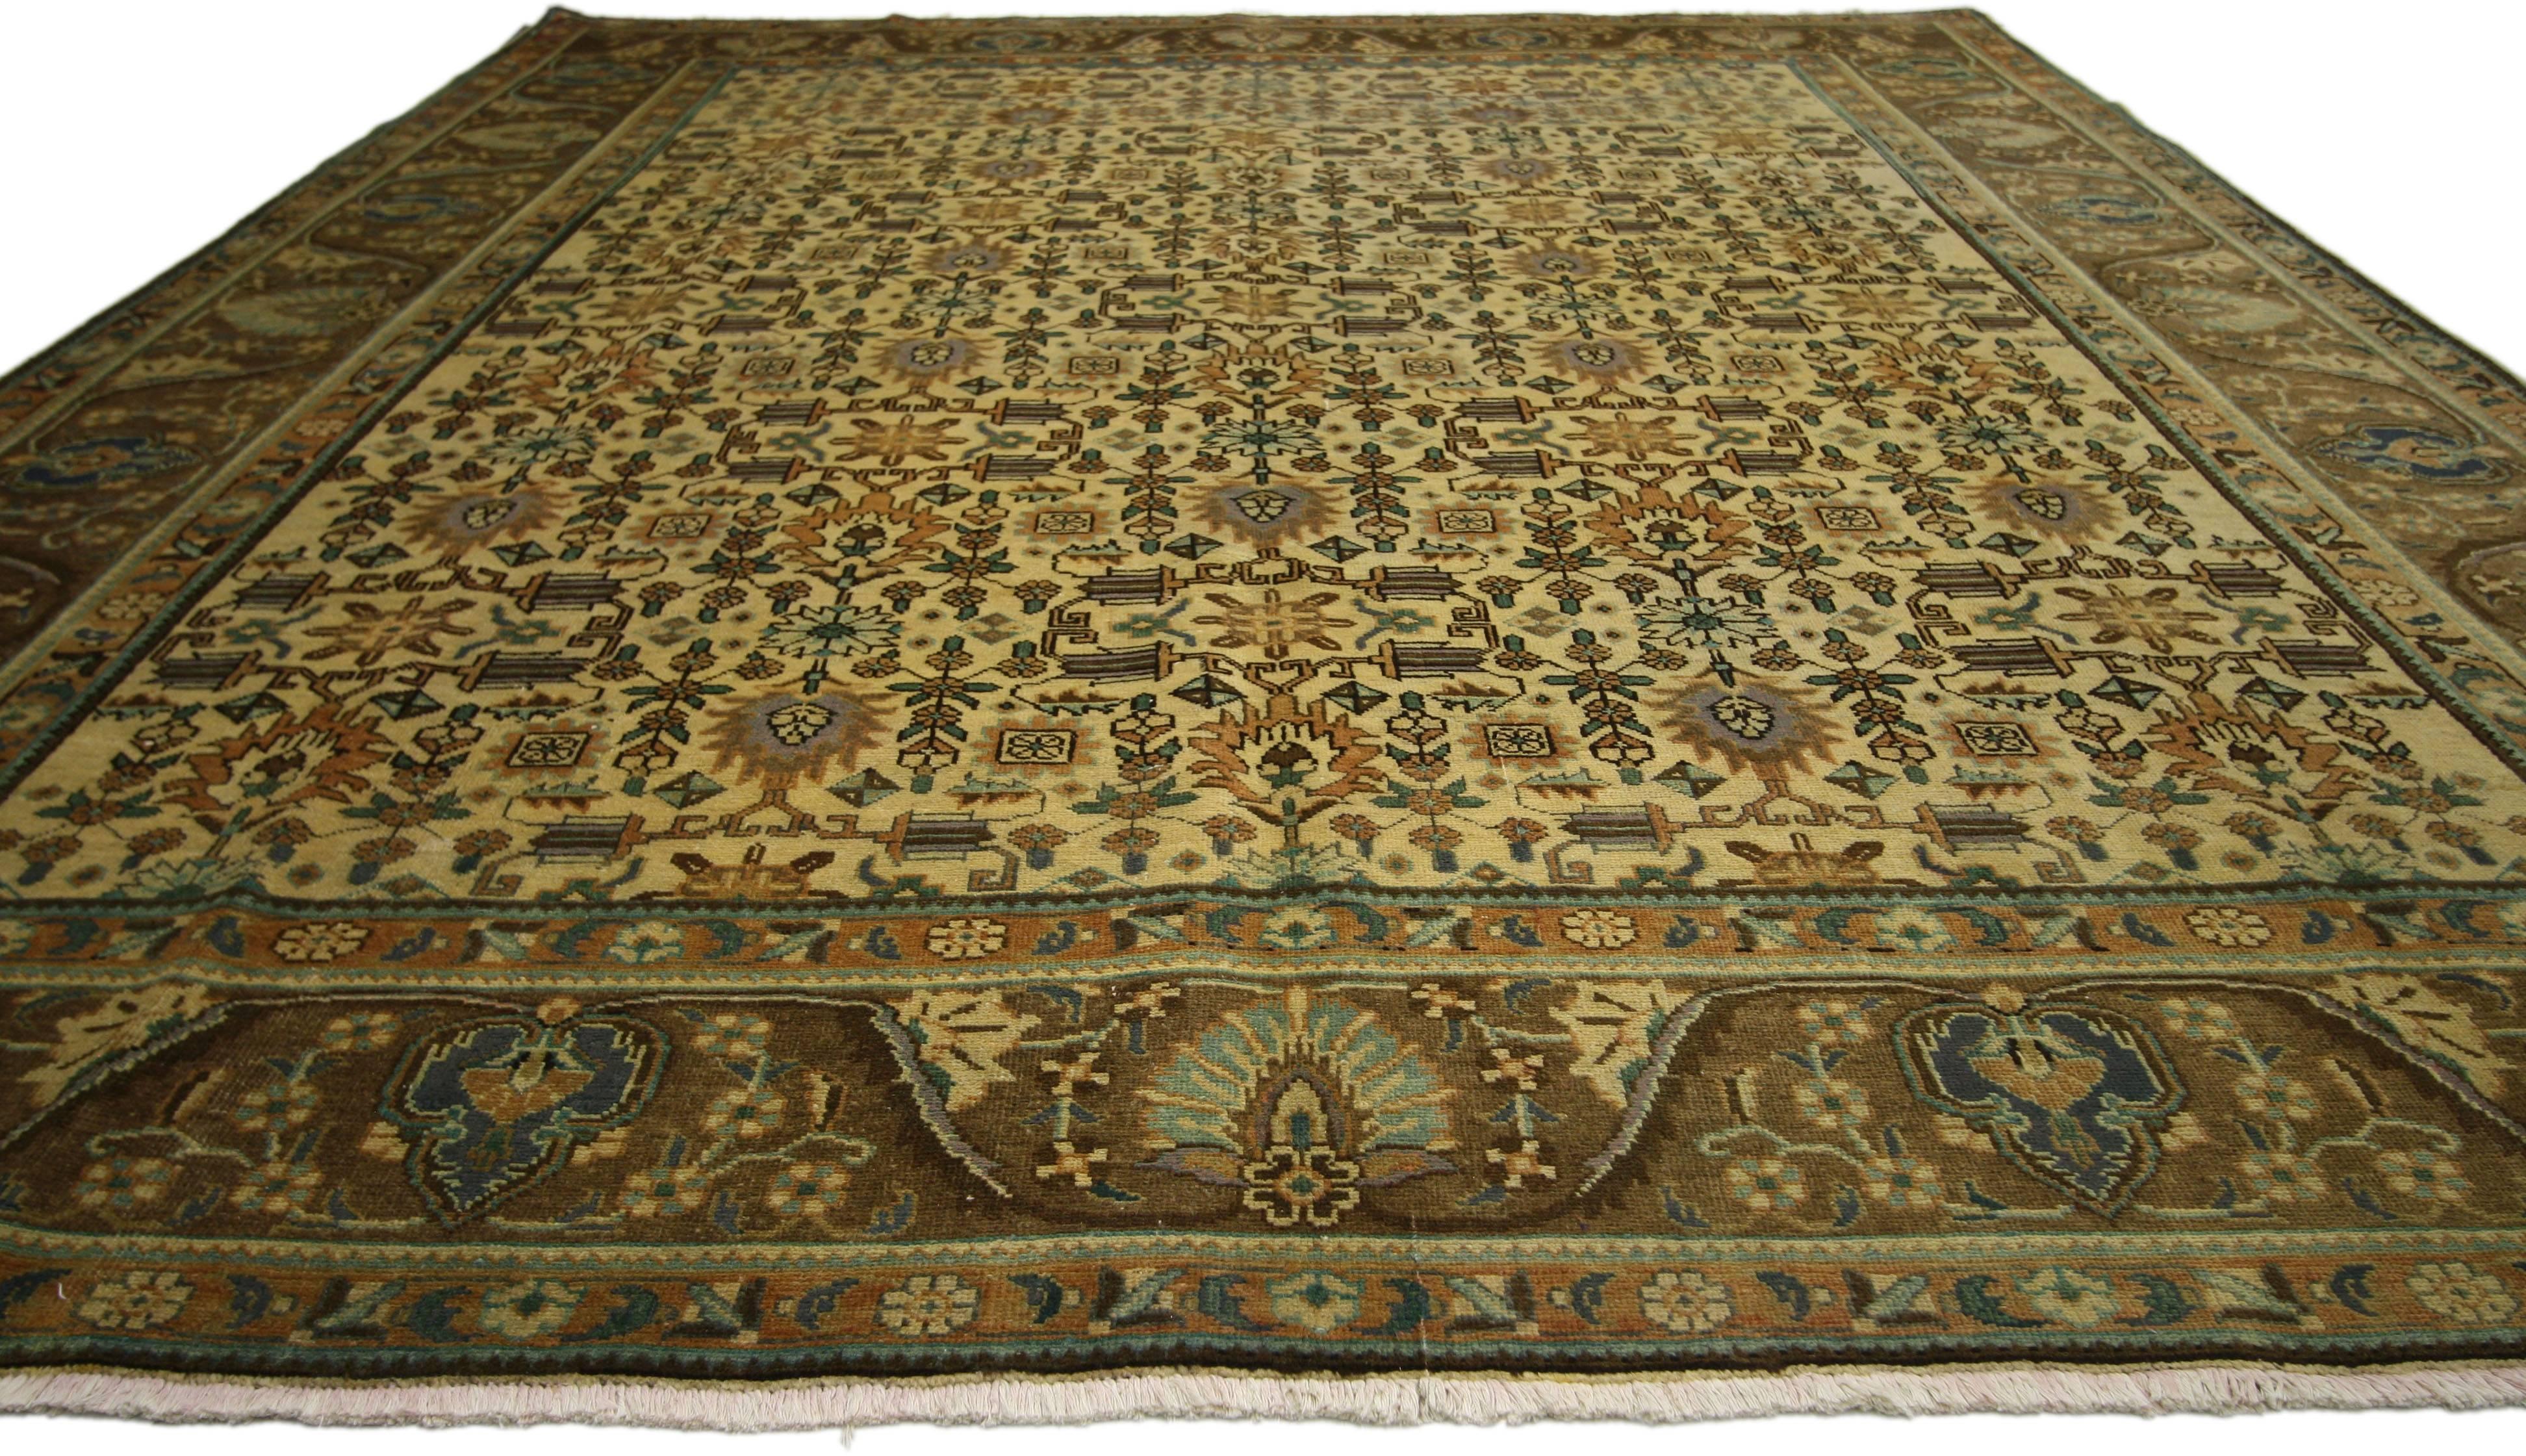 76360, vintage Persian Tabriz rug 09'08 x 12'07. This hand-knotted wool vintage Persian Tabriz rug features an all-over pattern surrounded by a classic border creating a well-balanced and timeless design. This vintage Persian Tabriz rug brings a